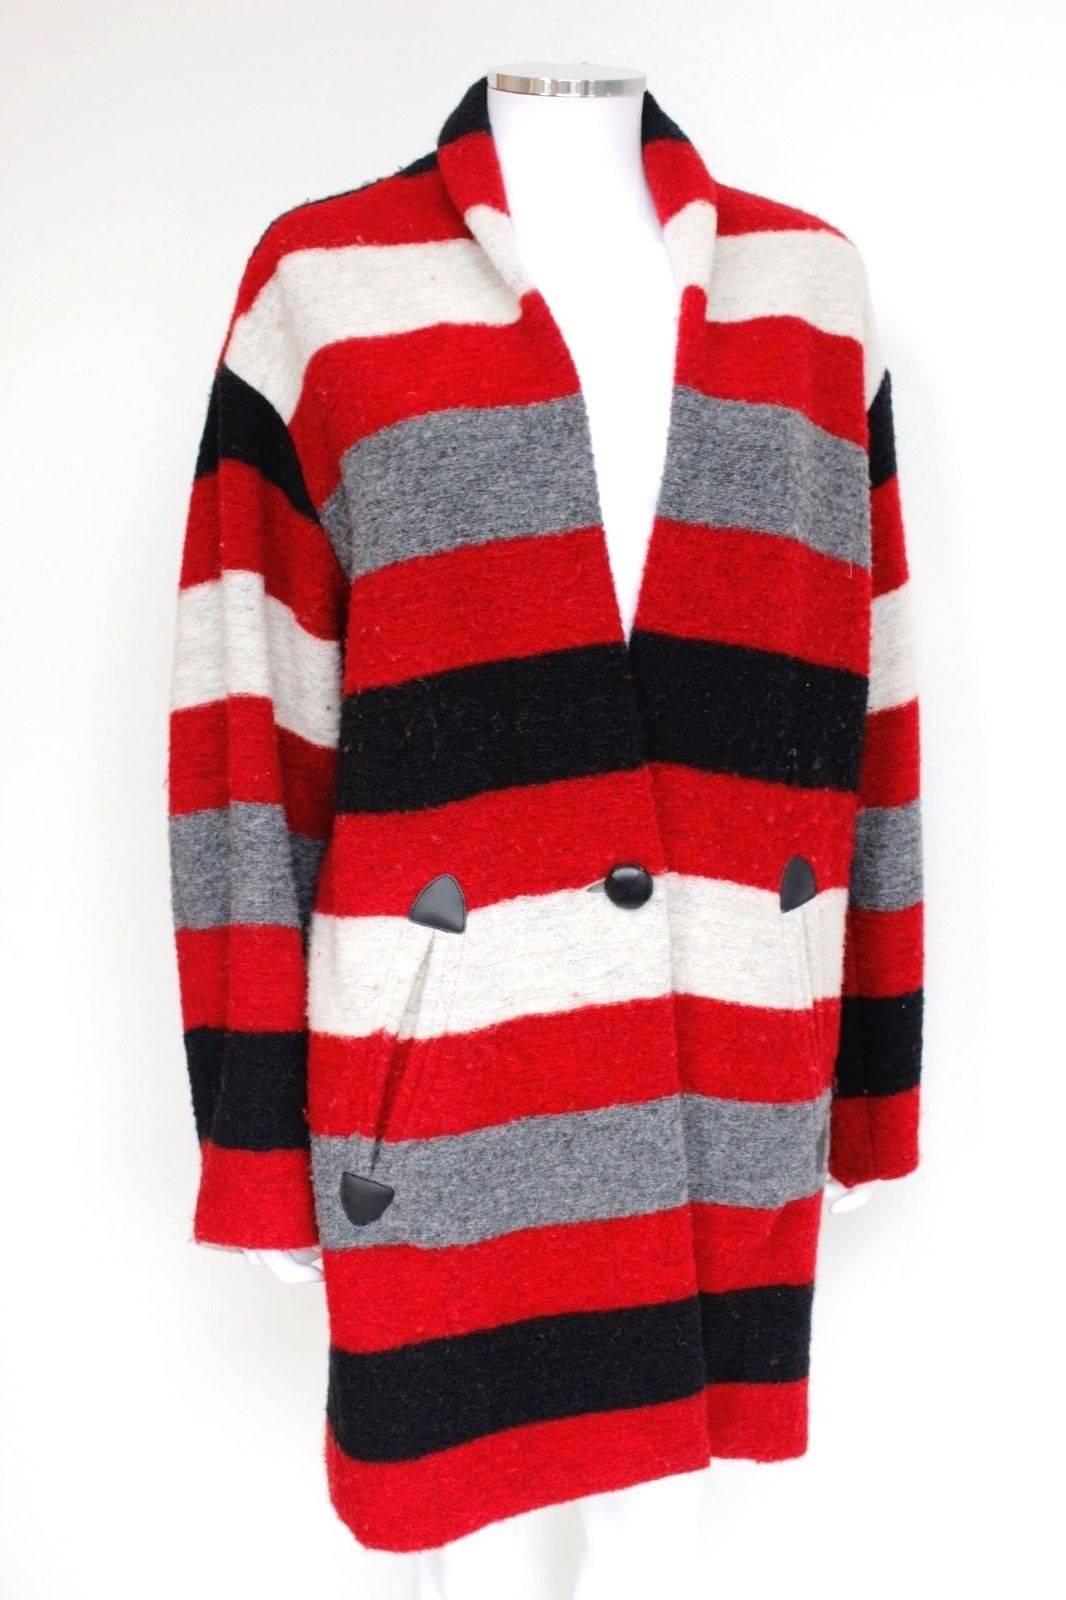 New Isabel Marant Gabriel blanket-striped Oversized Red Black Coat 34 uk 6-8

Isabel Marant Étoile is the go-to label for cool, easy pieces like this wool-blend blanket-striped Gabrie coat.

 It's patterned in shades of red, cream and grey, and